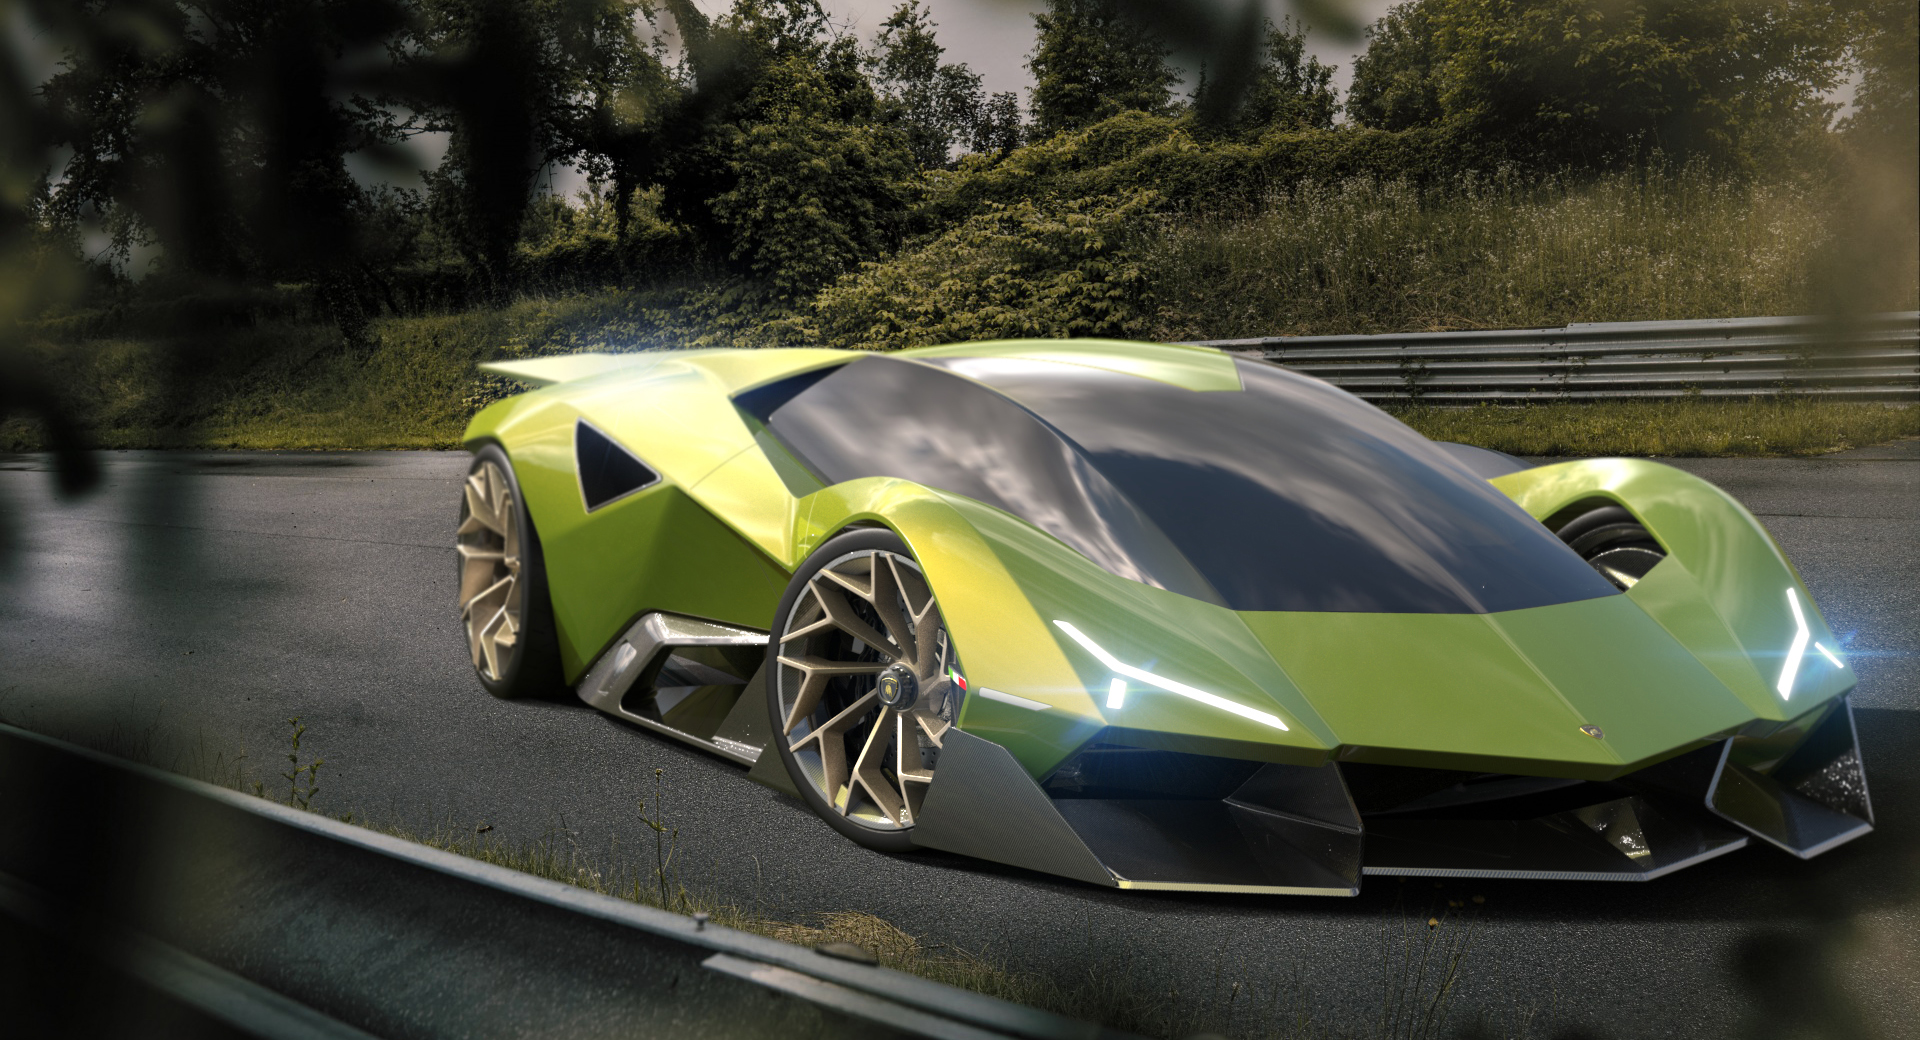 Matador Concept Uses Past To Imagine Their Car Of The